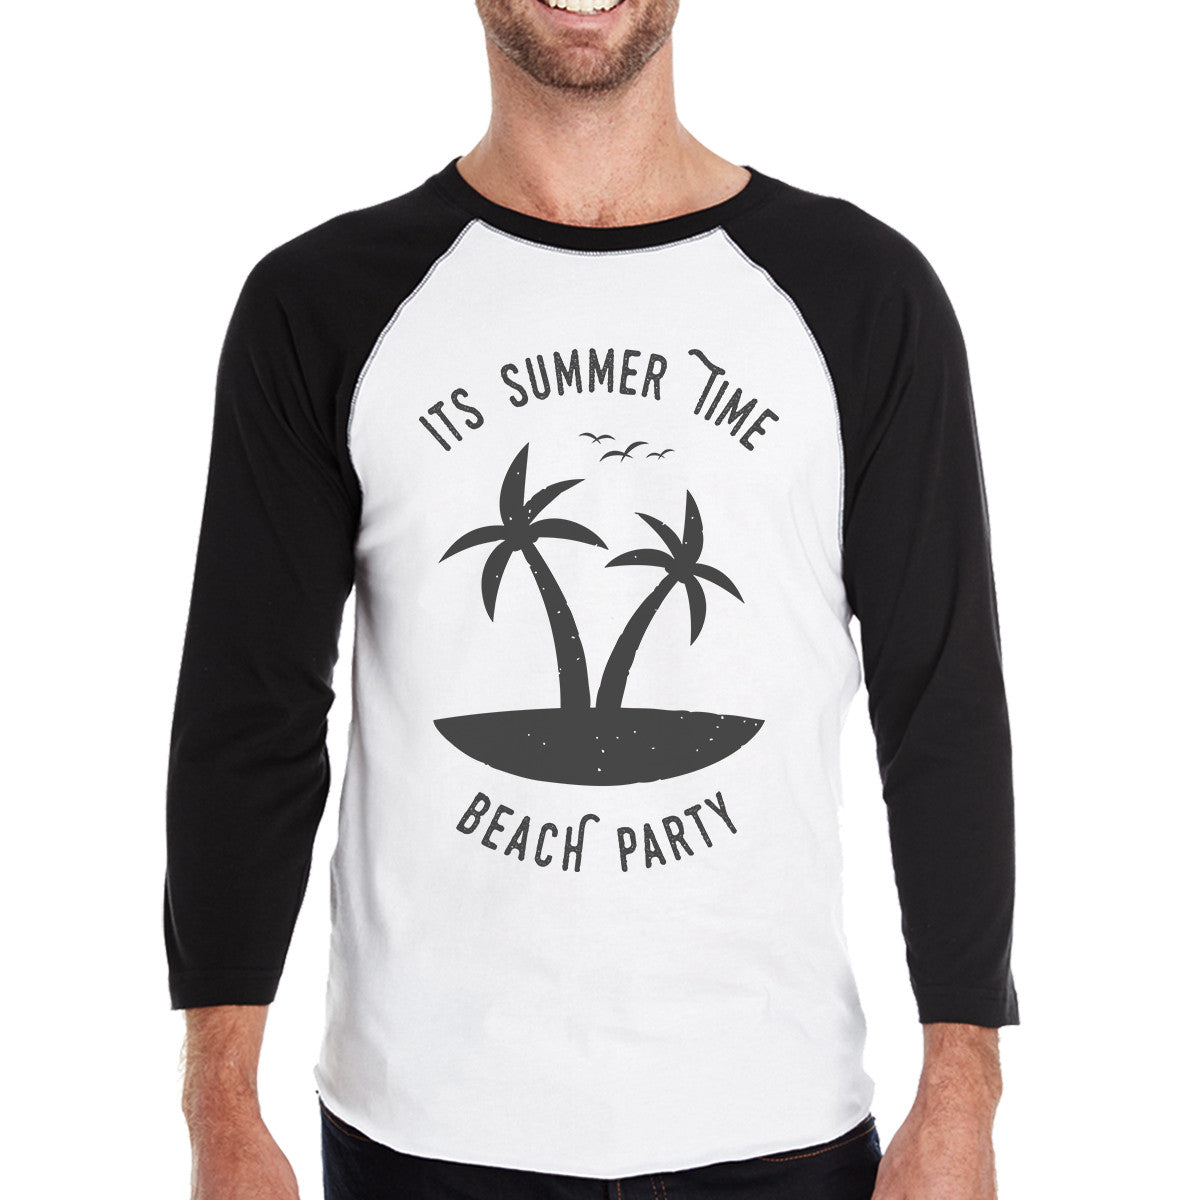 It's Summer Time Beach Party Mens Black And White Baseball S